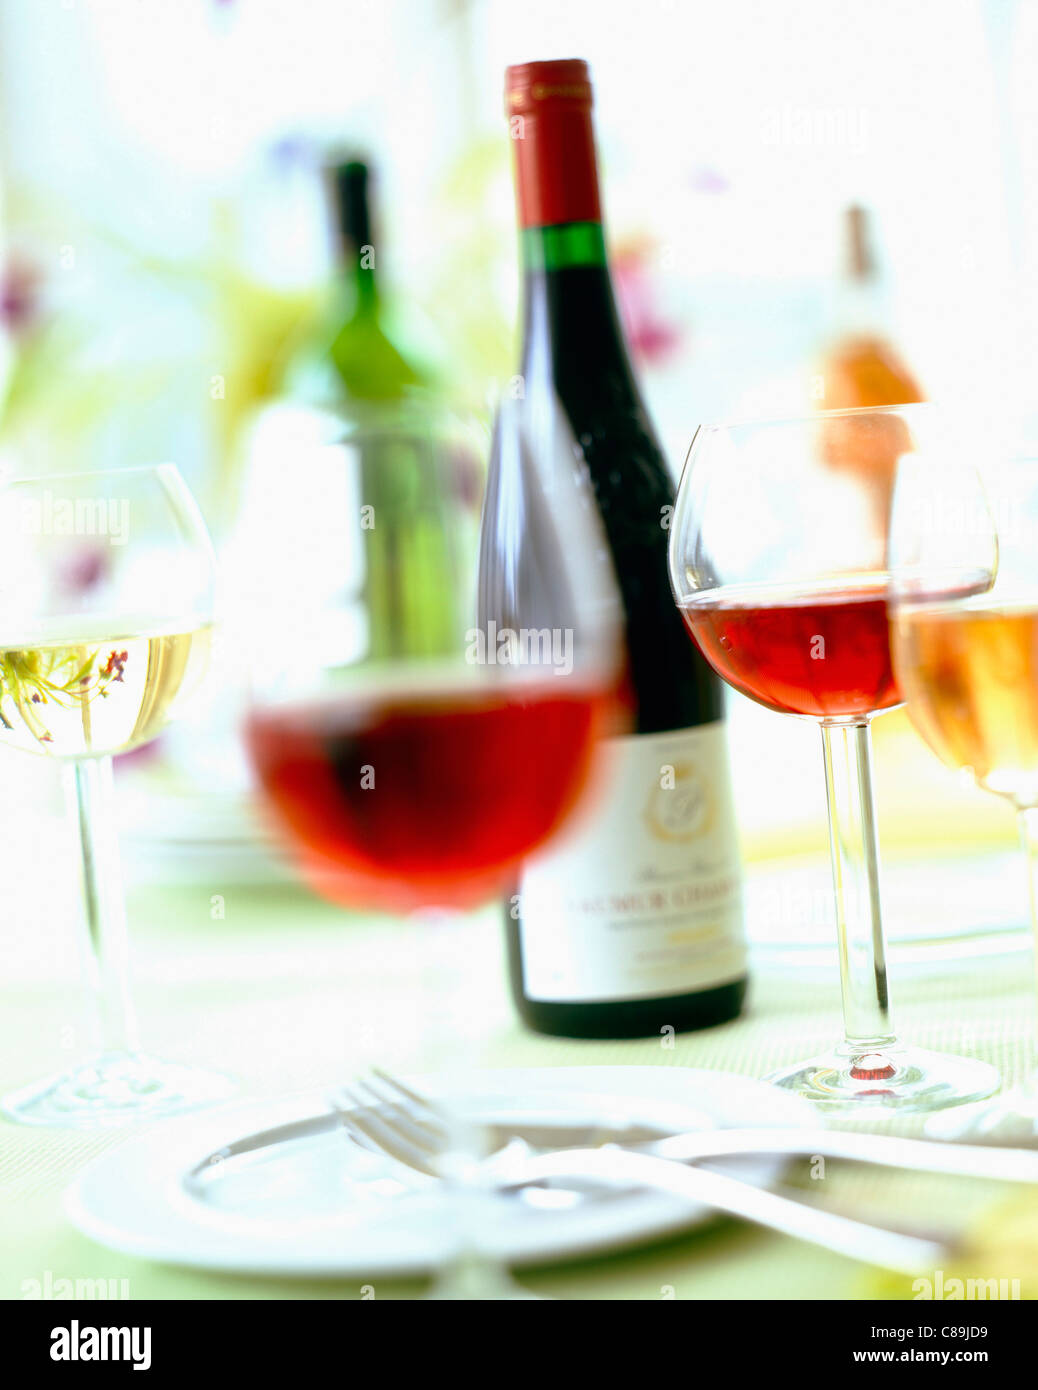 Bottles and glasses of red and rosé wine Stock Photo